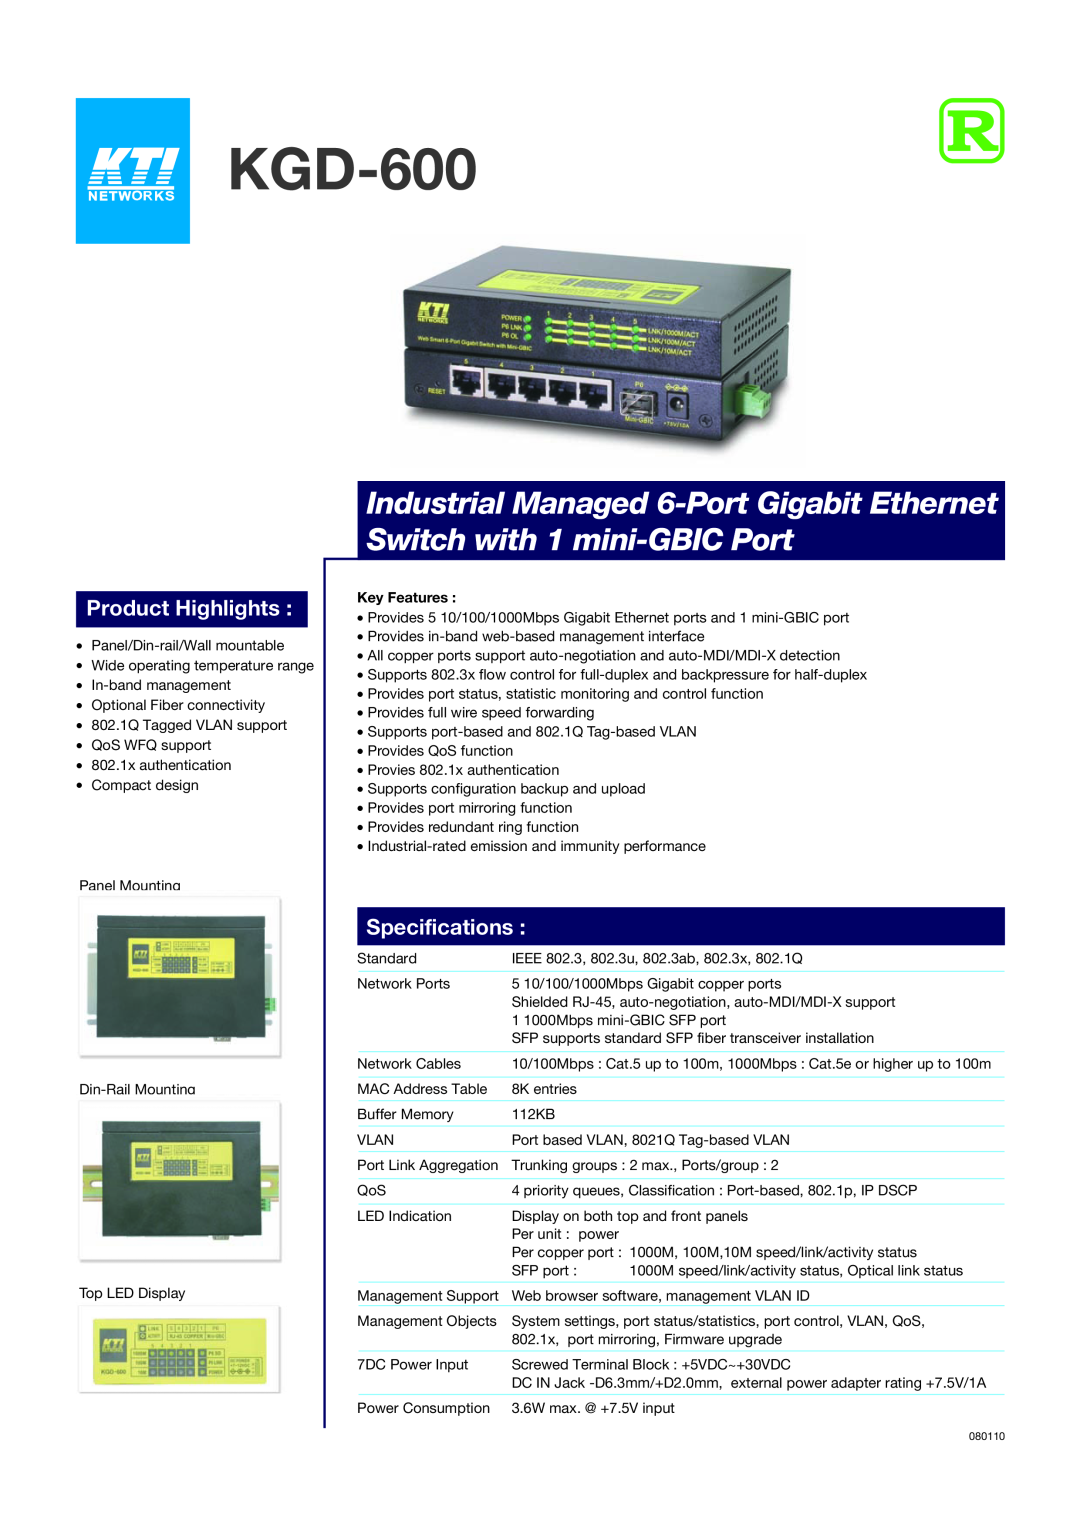 KTI Networks KGD-600 specifications Product Highlights, Specifications, Key Features 